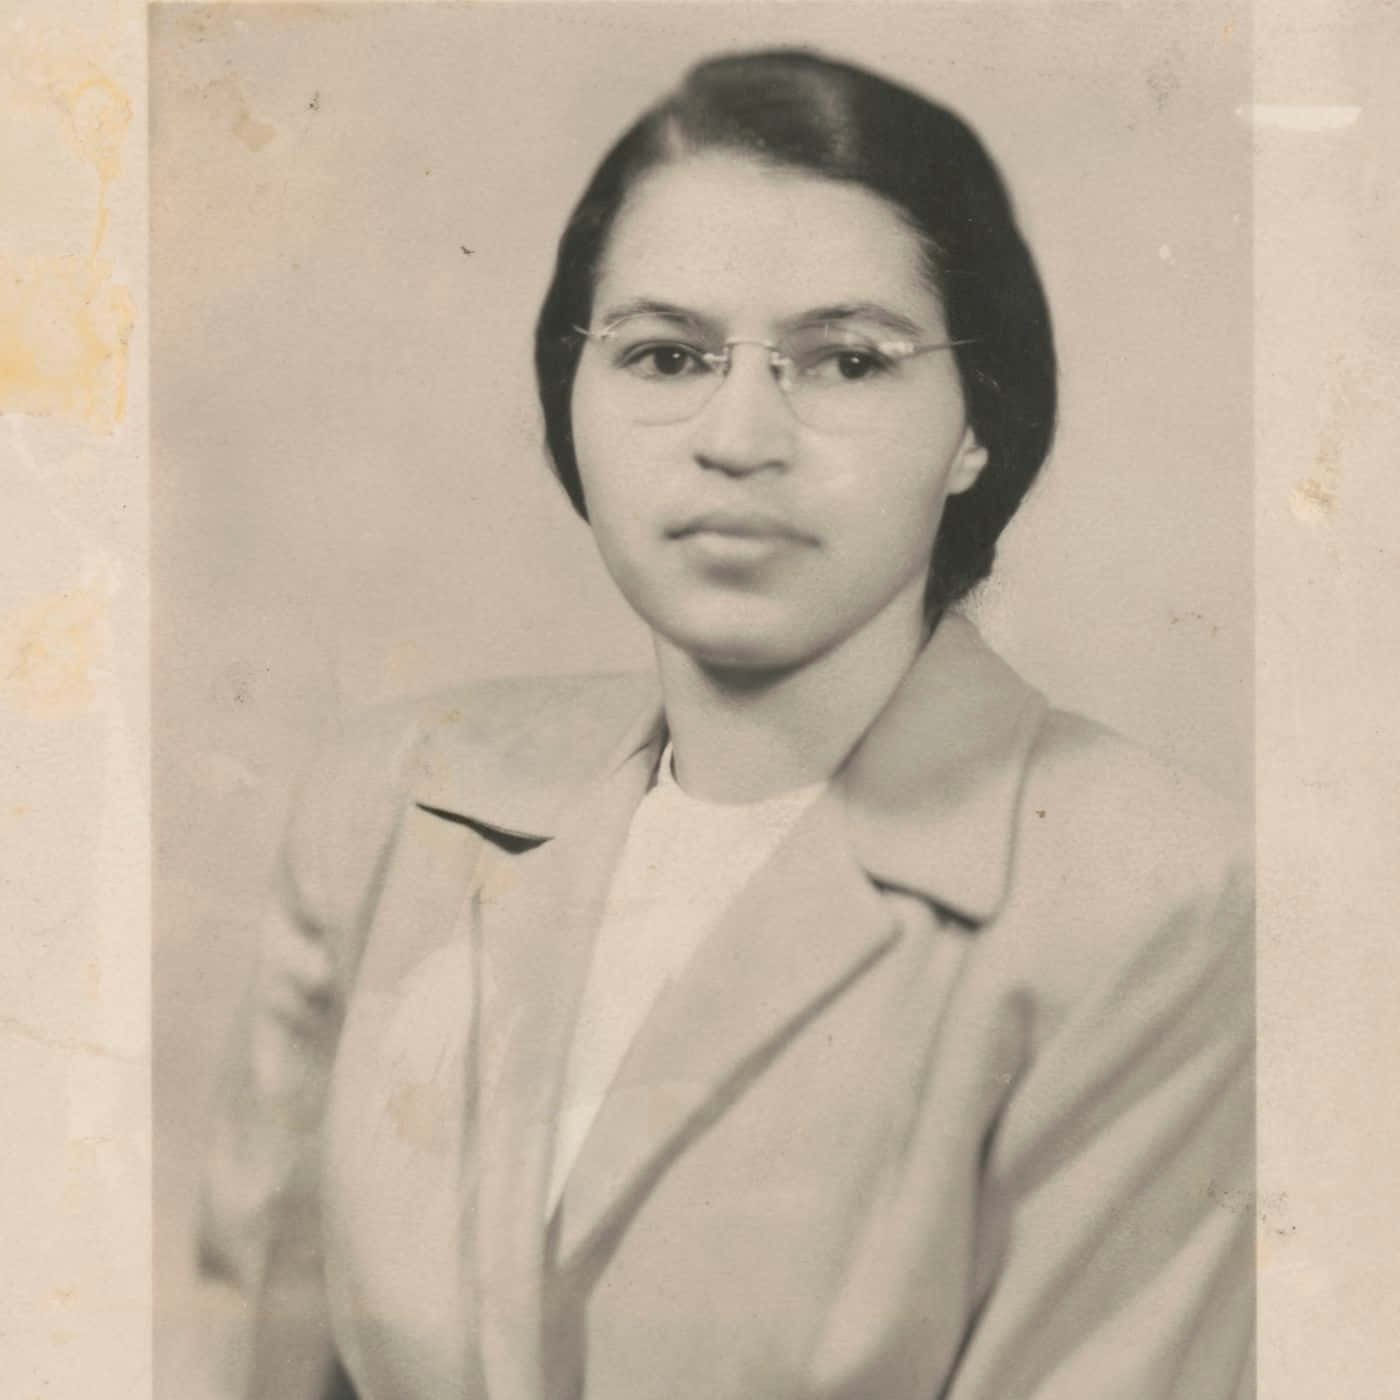 A Woman In Glasses Is Posing For A Photo